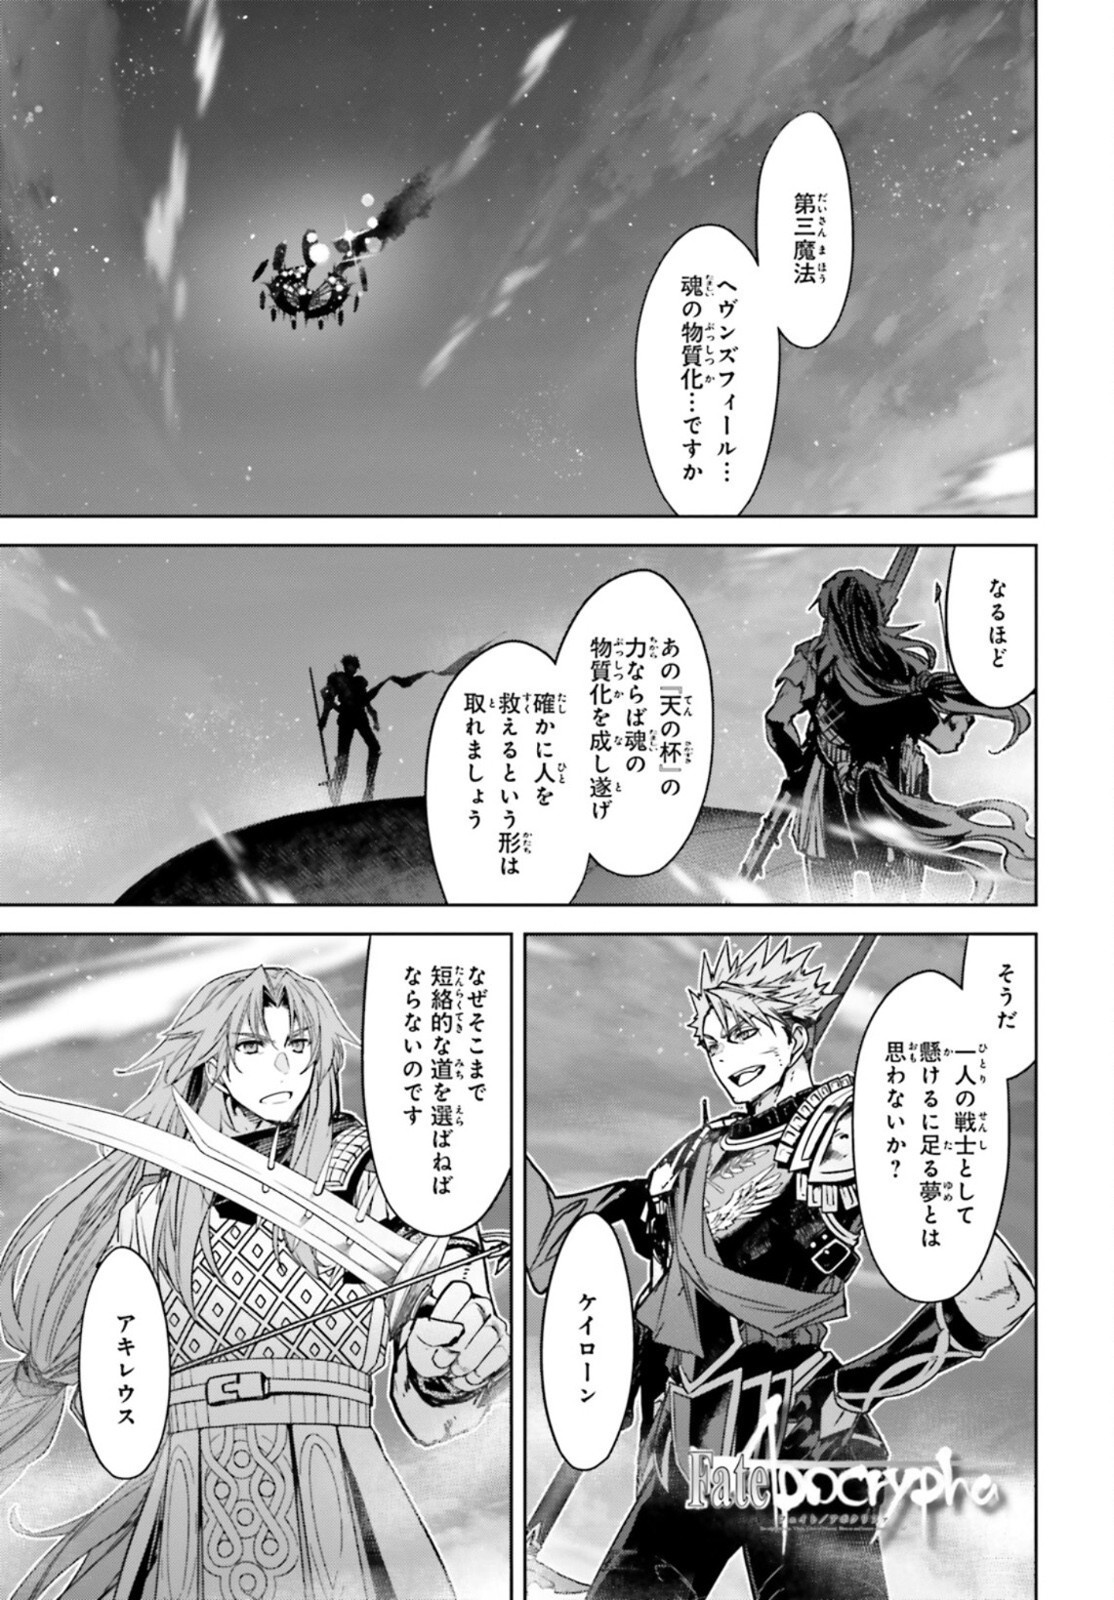 Fate-Apocrypha - Chapter 56 - Page 1